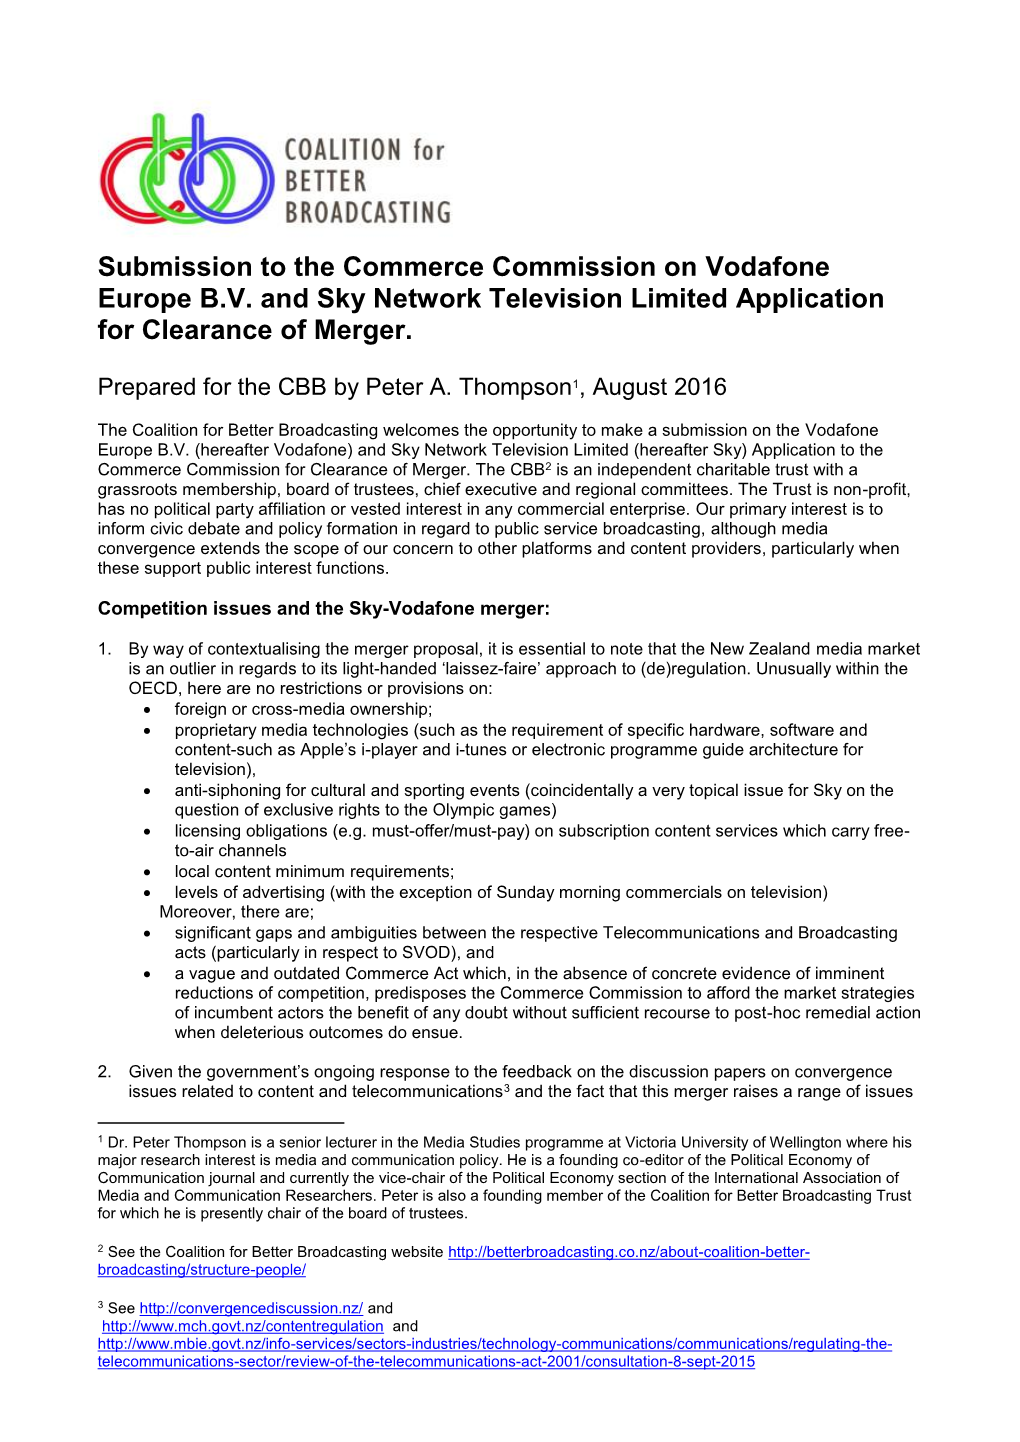 Coalition for Better Broadcasting – Submission Vodafone/Sky Merger